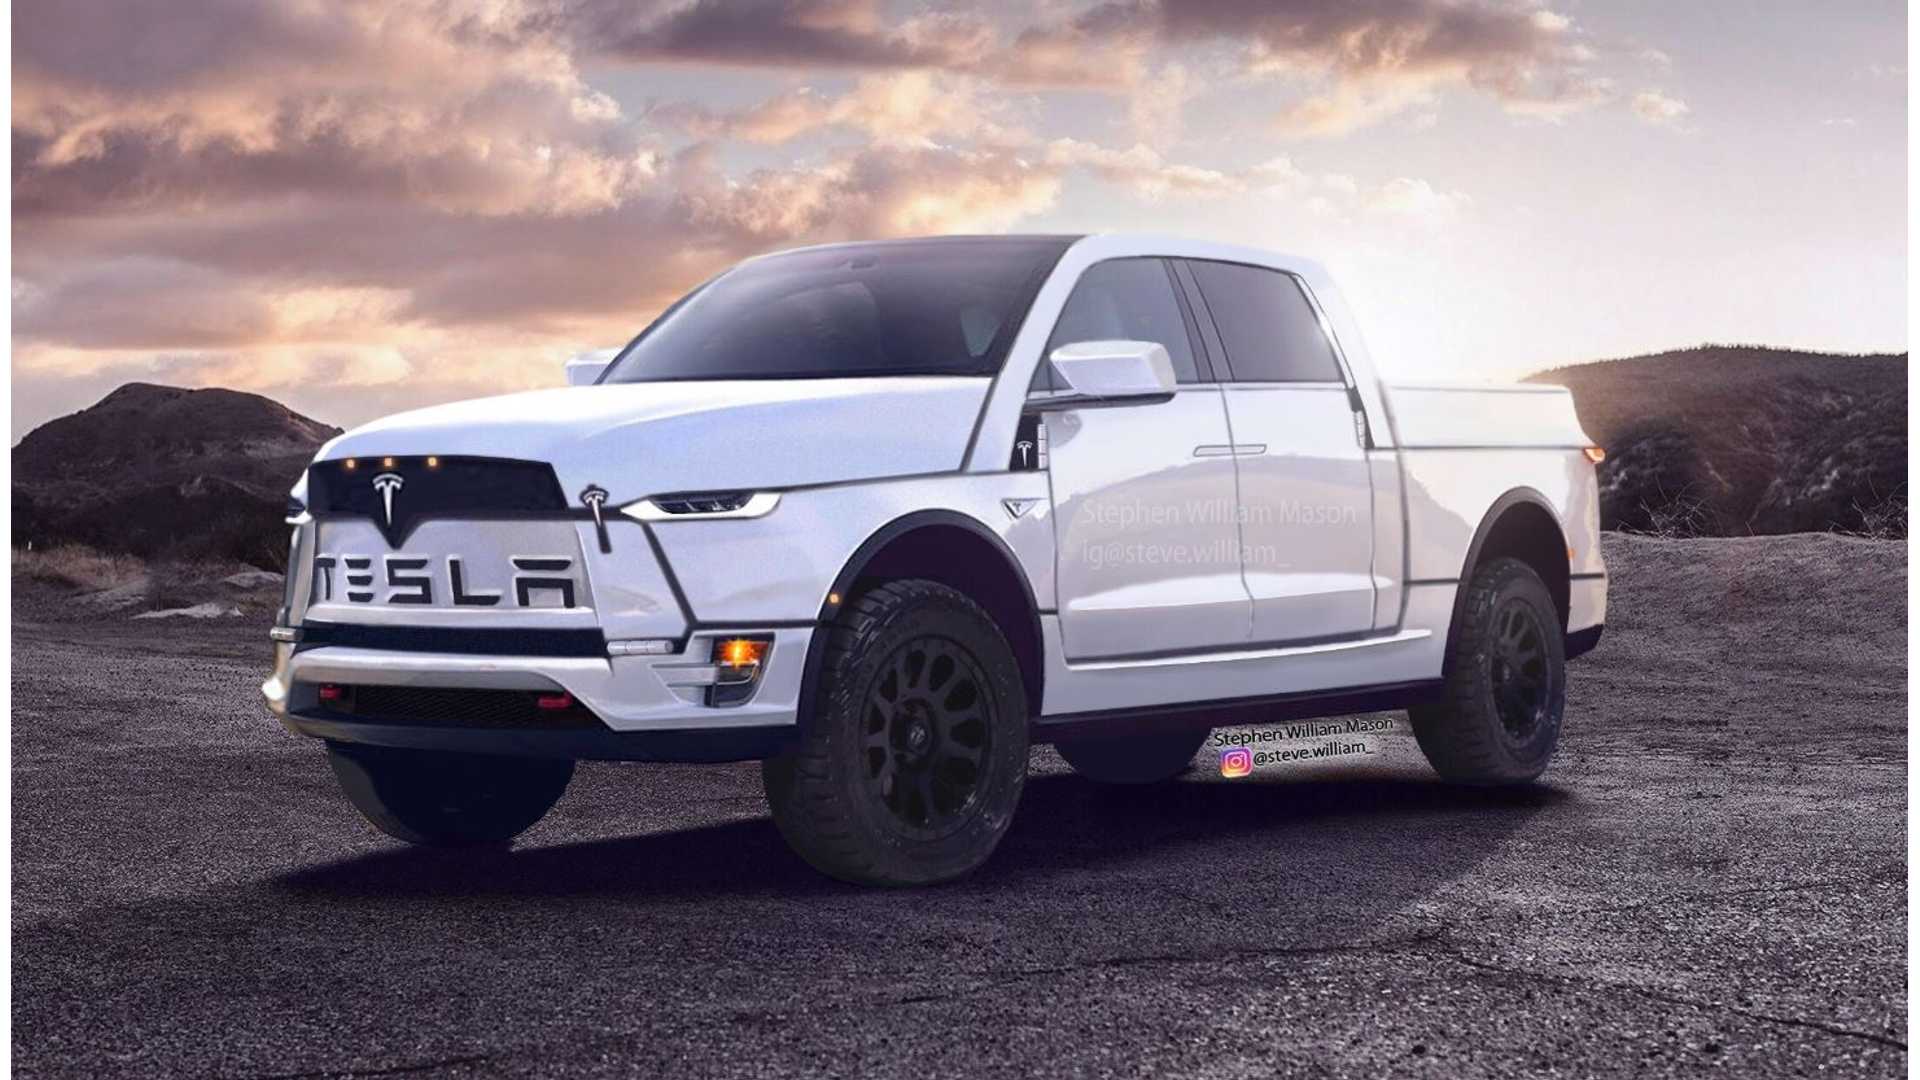 New Tesla Electric Pickup Render Is Bold, Reminds Us Of Ram Truck